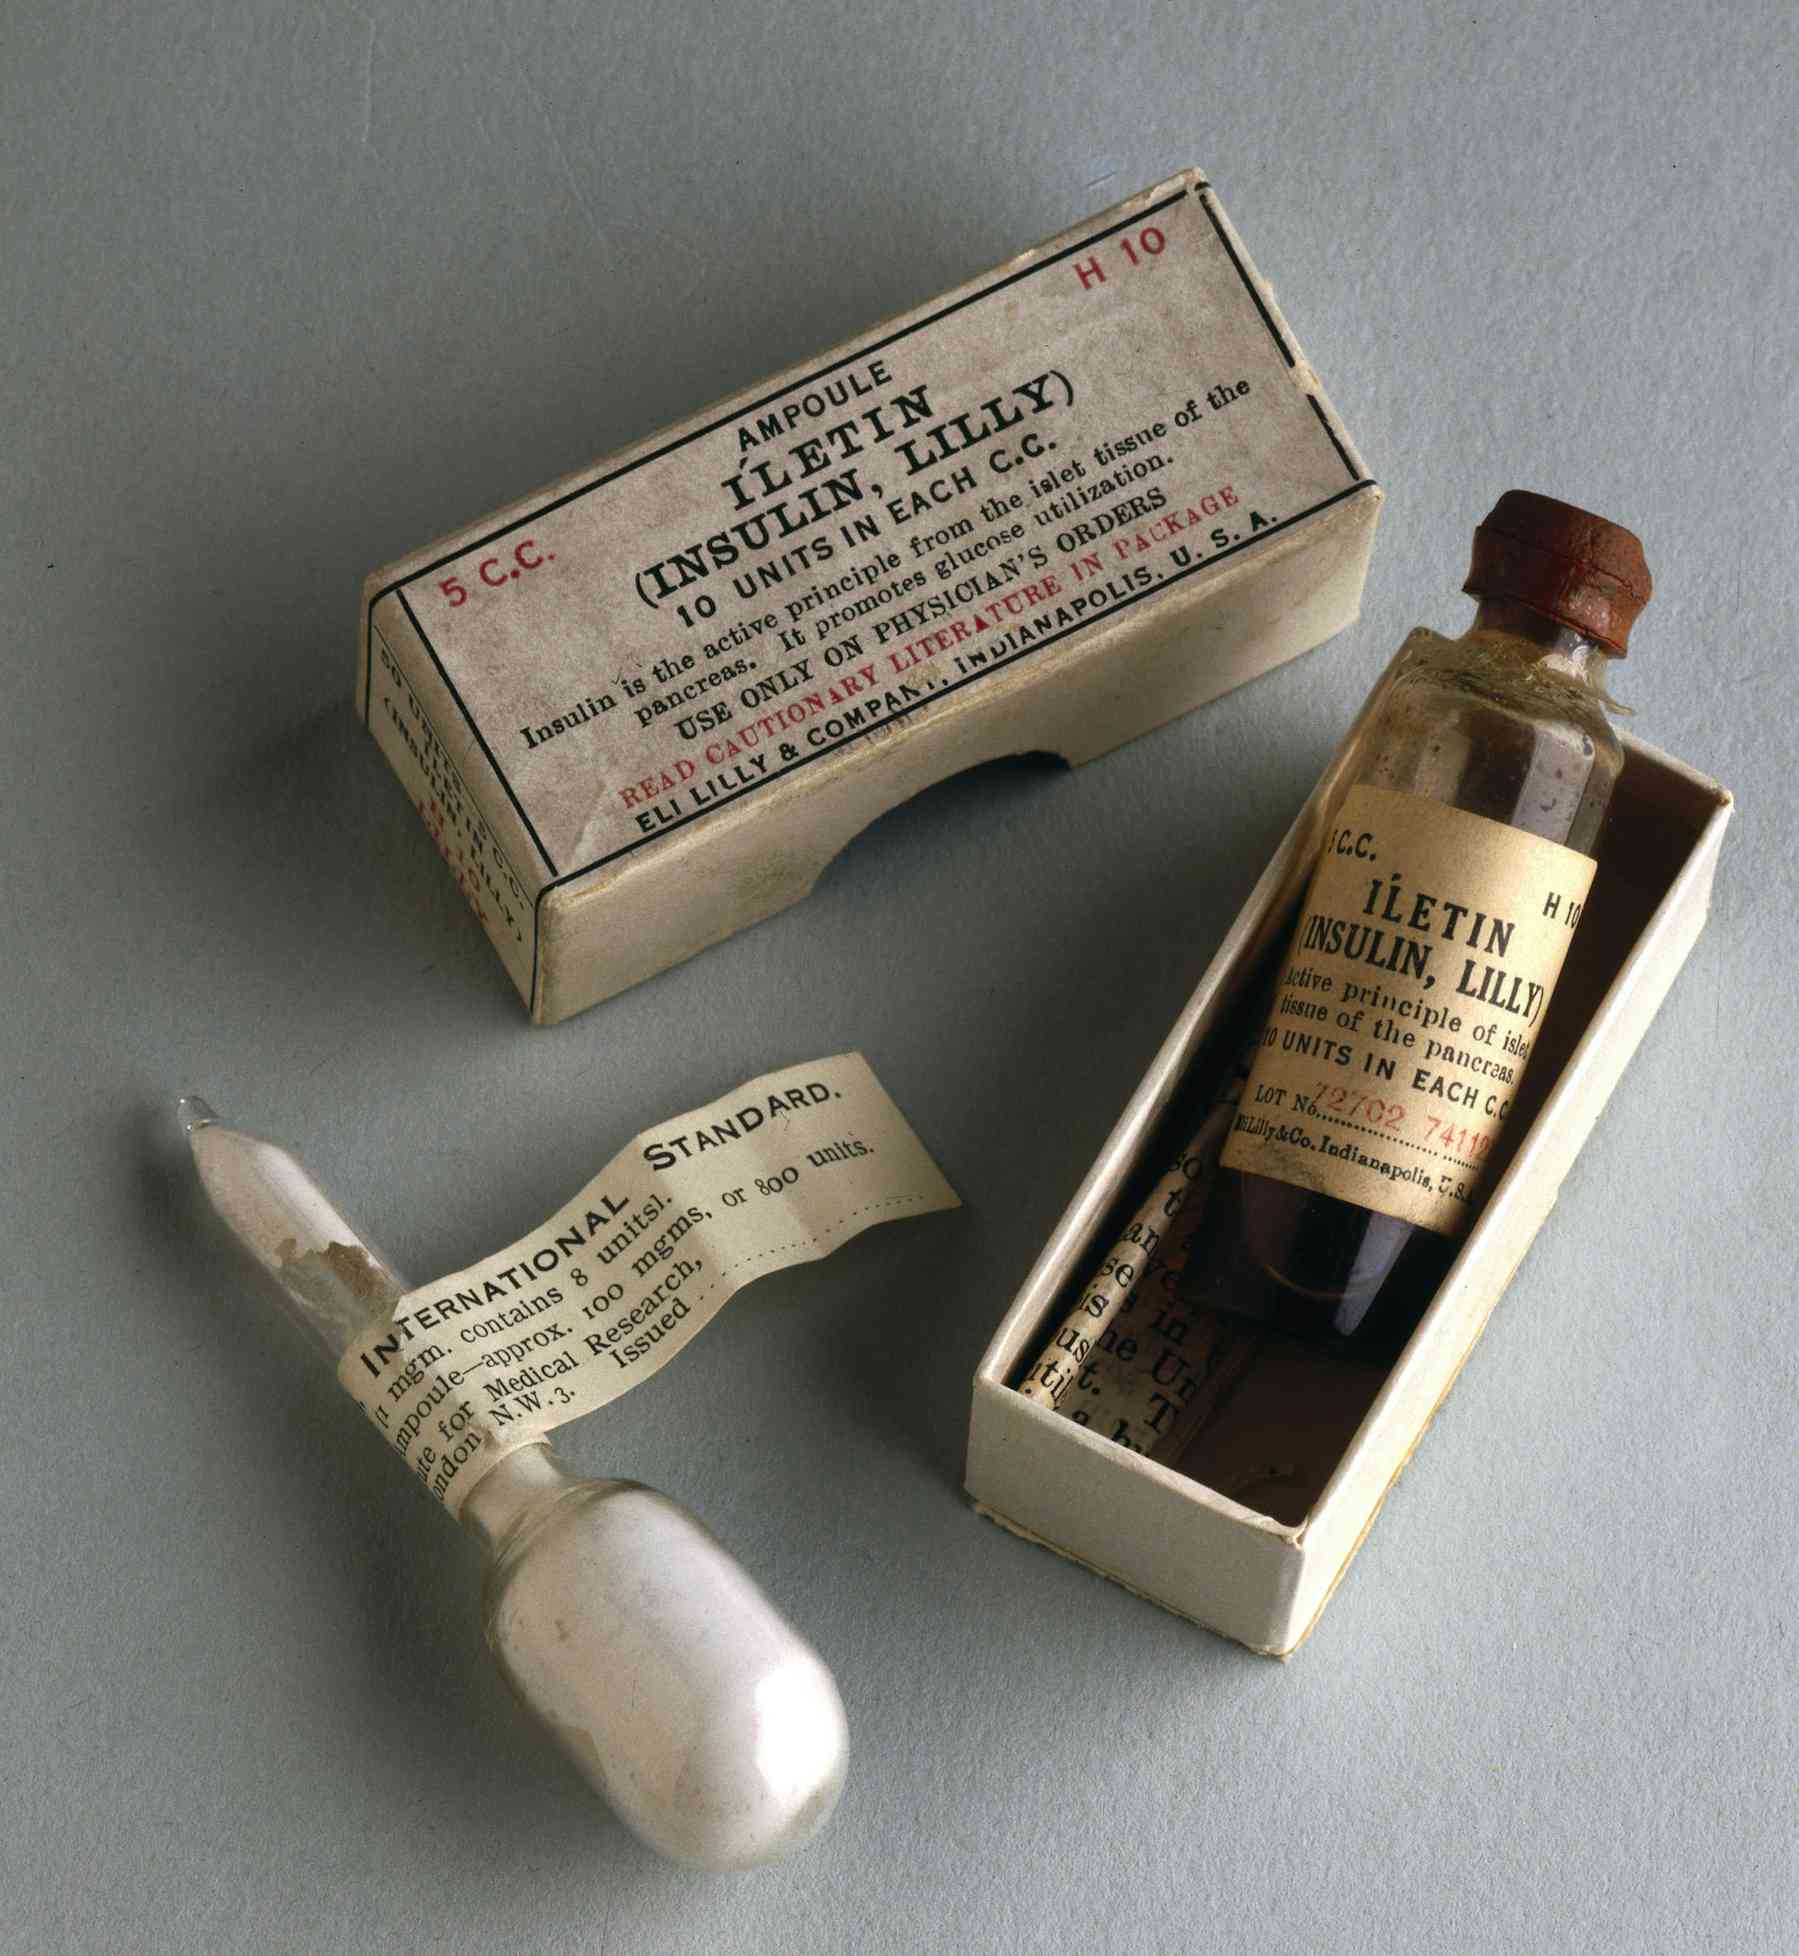 insulin-was-discovered-100-years-ago-but-it-took-a-lot-more-than-one